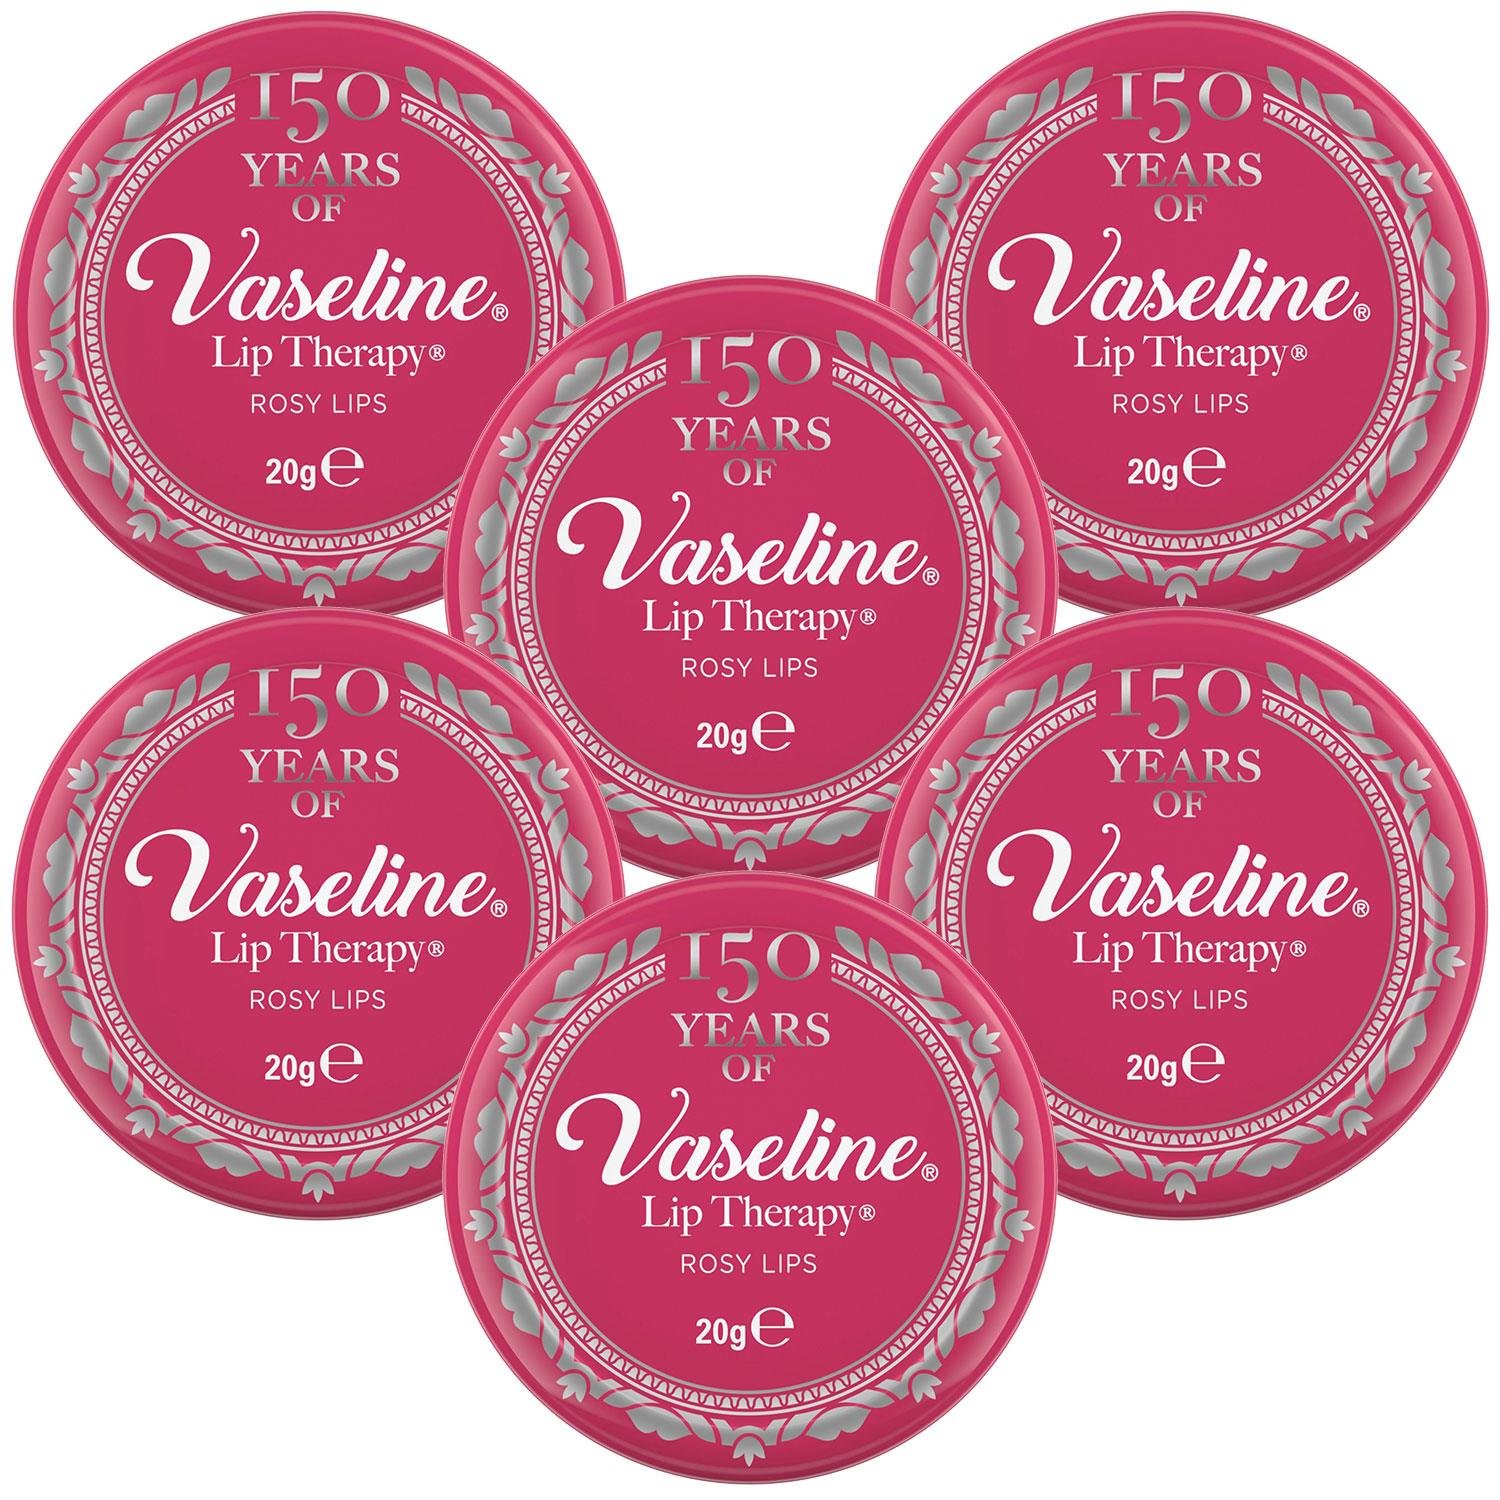 Vaseline Lip Therapy Petroleum Jelly Rosy Lips 6 x 20g